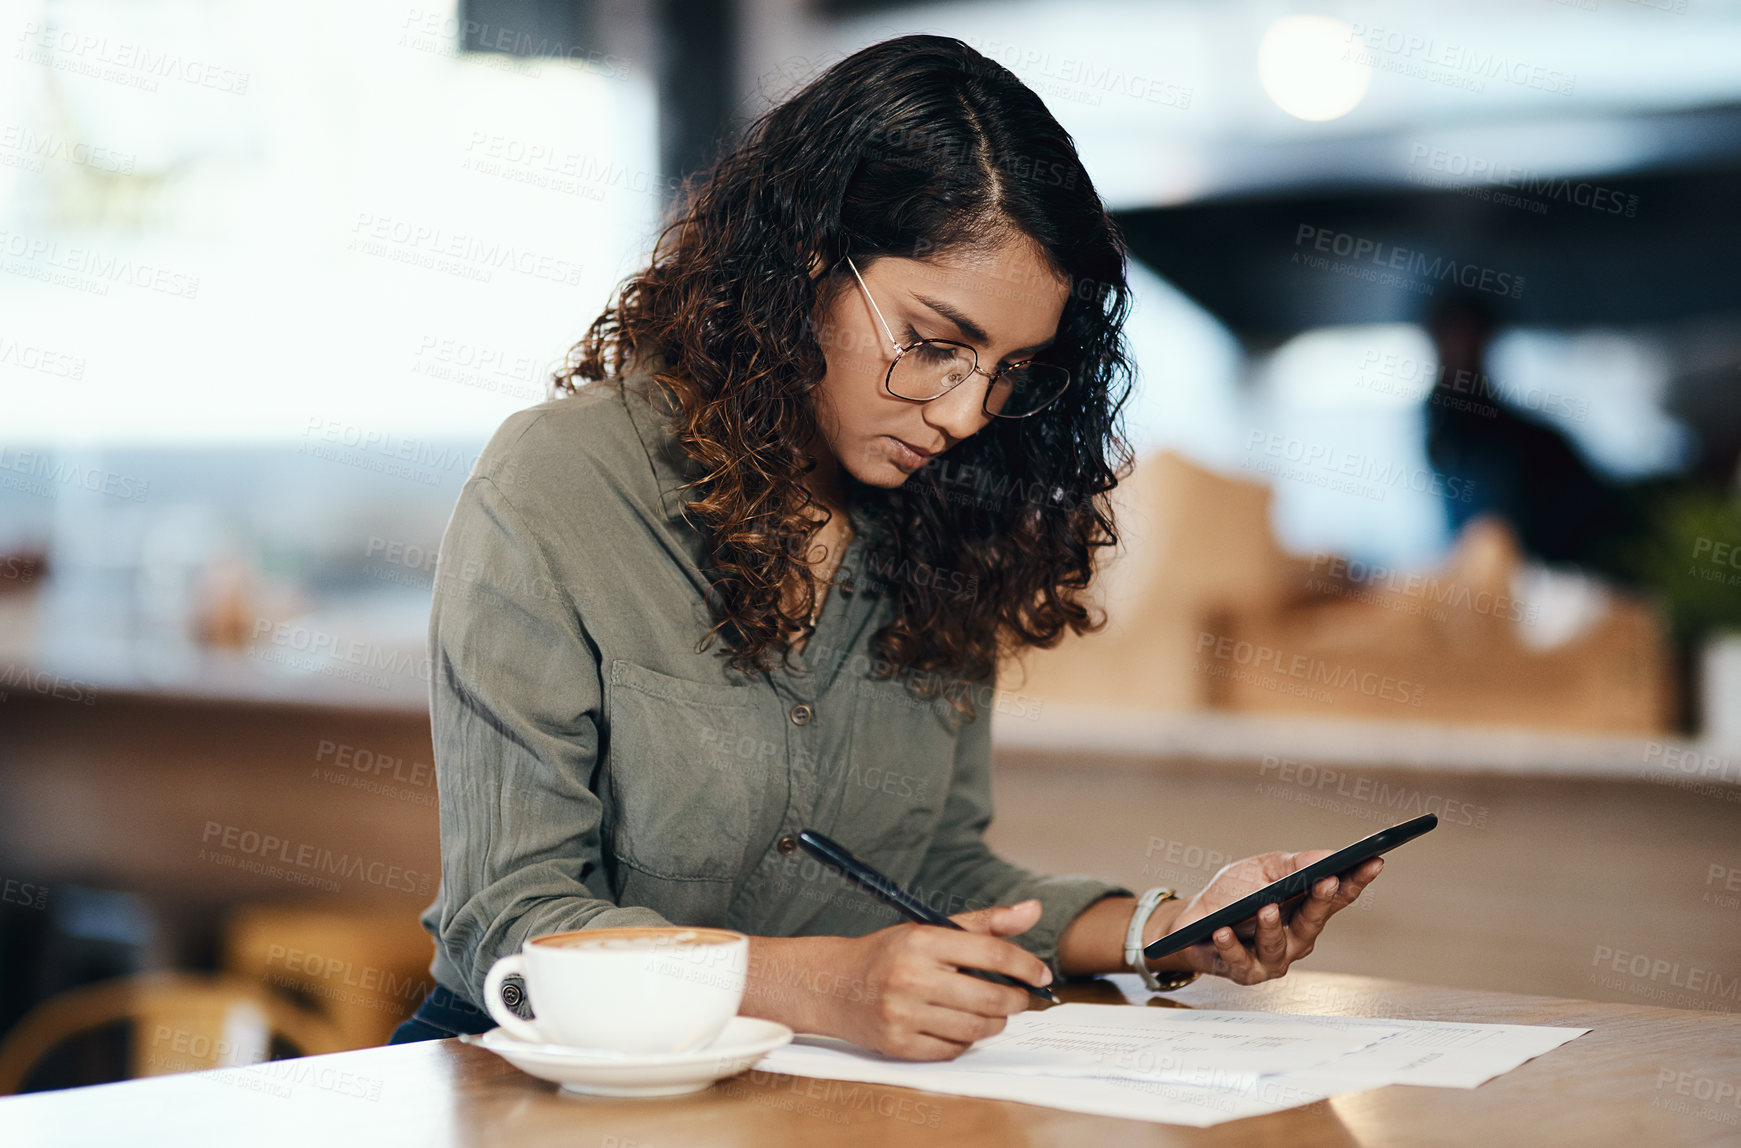 Buy stock photo Small business owner or entrepreneur filling out paper work or a document in an internet cafe or coffee shop with a phone in hand. Young woman writing on a from and sitting at a table in a restaurant